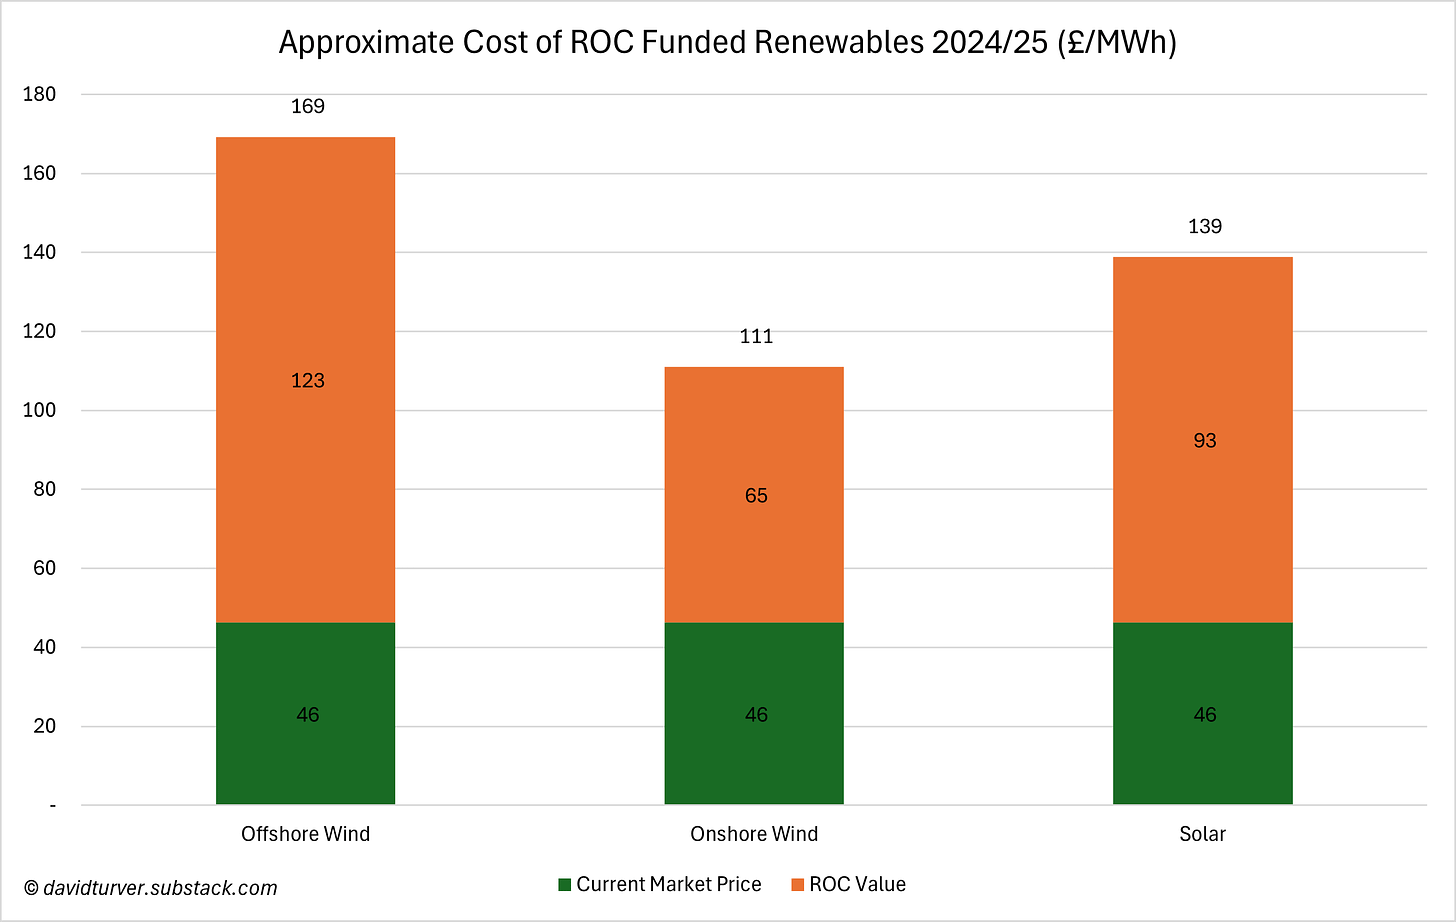 Figure 4 - Approximate Cost of ROC-Funded Renewables FY2024-25 (£ per MWh)